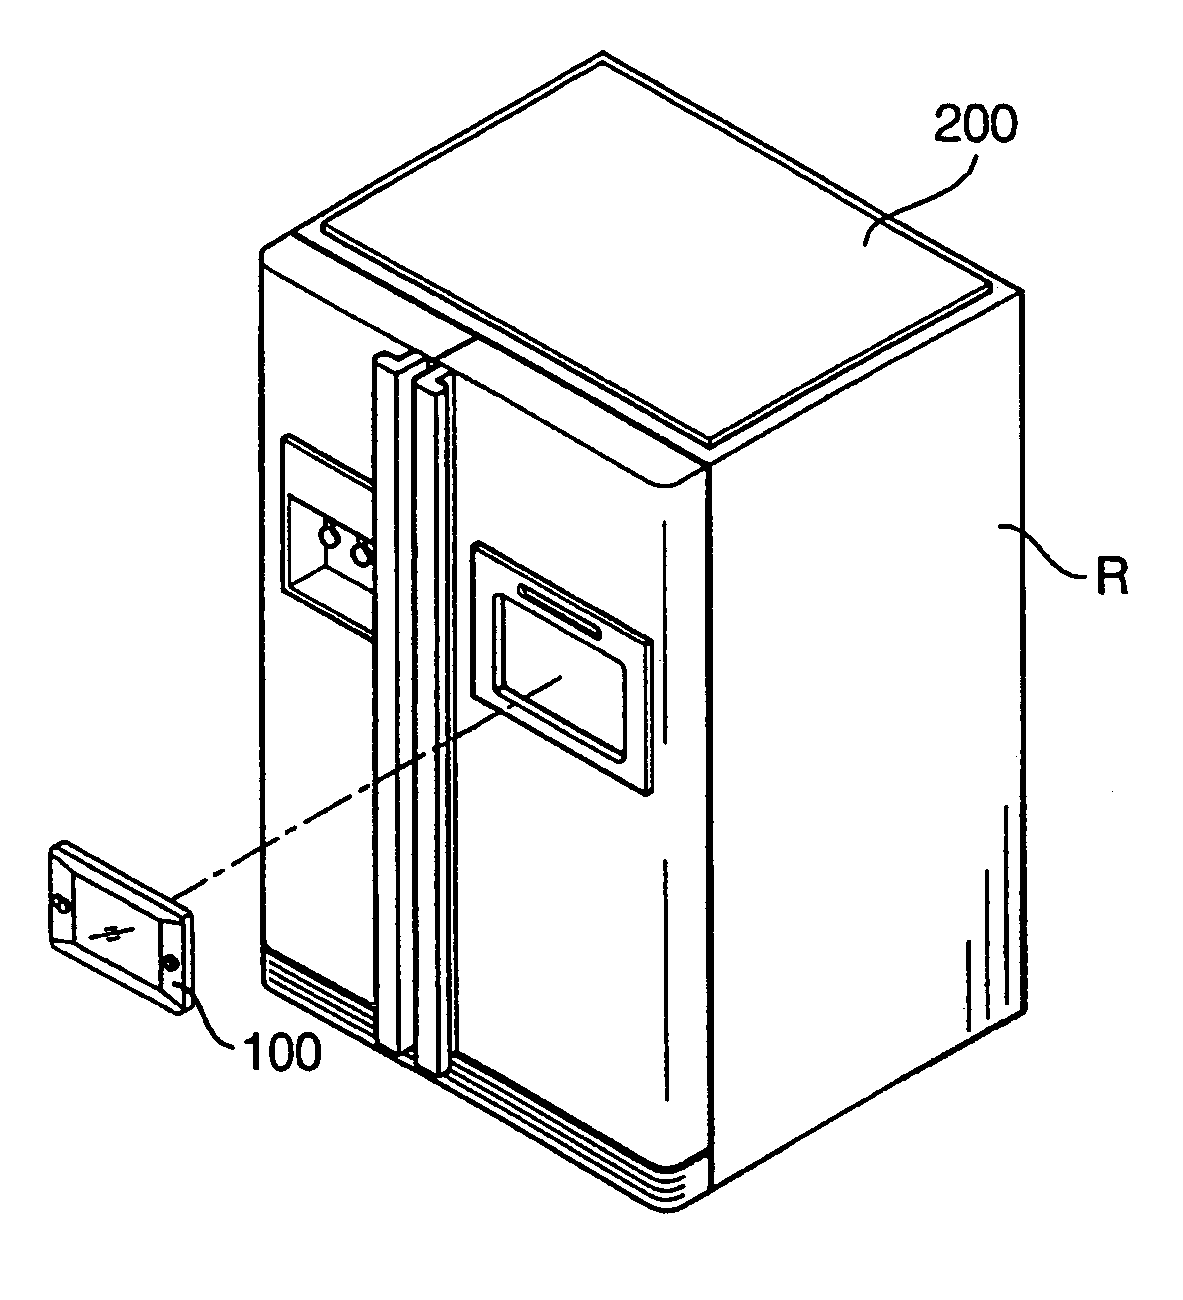 Internet refrigerator with web pad and method for operating the same